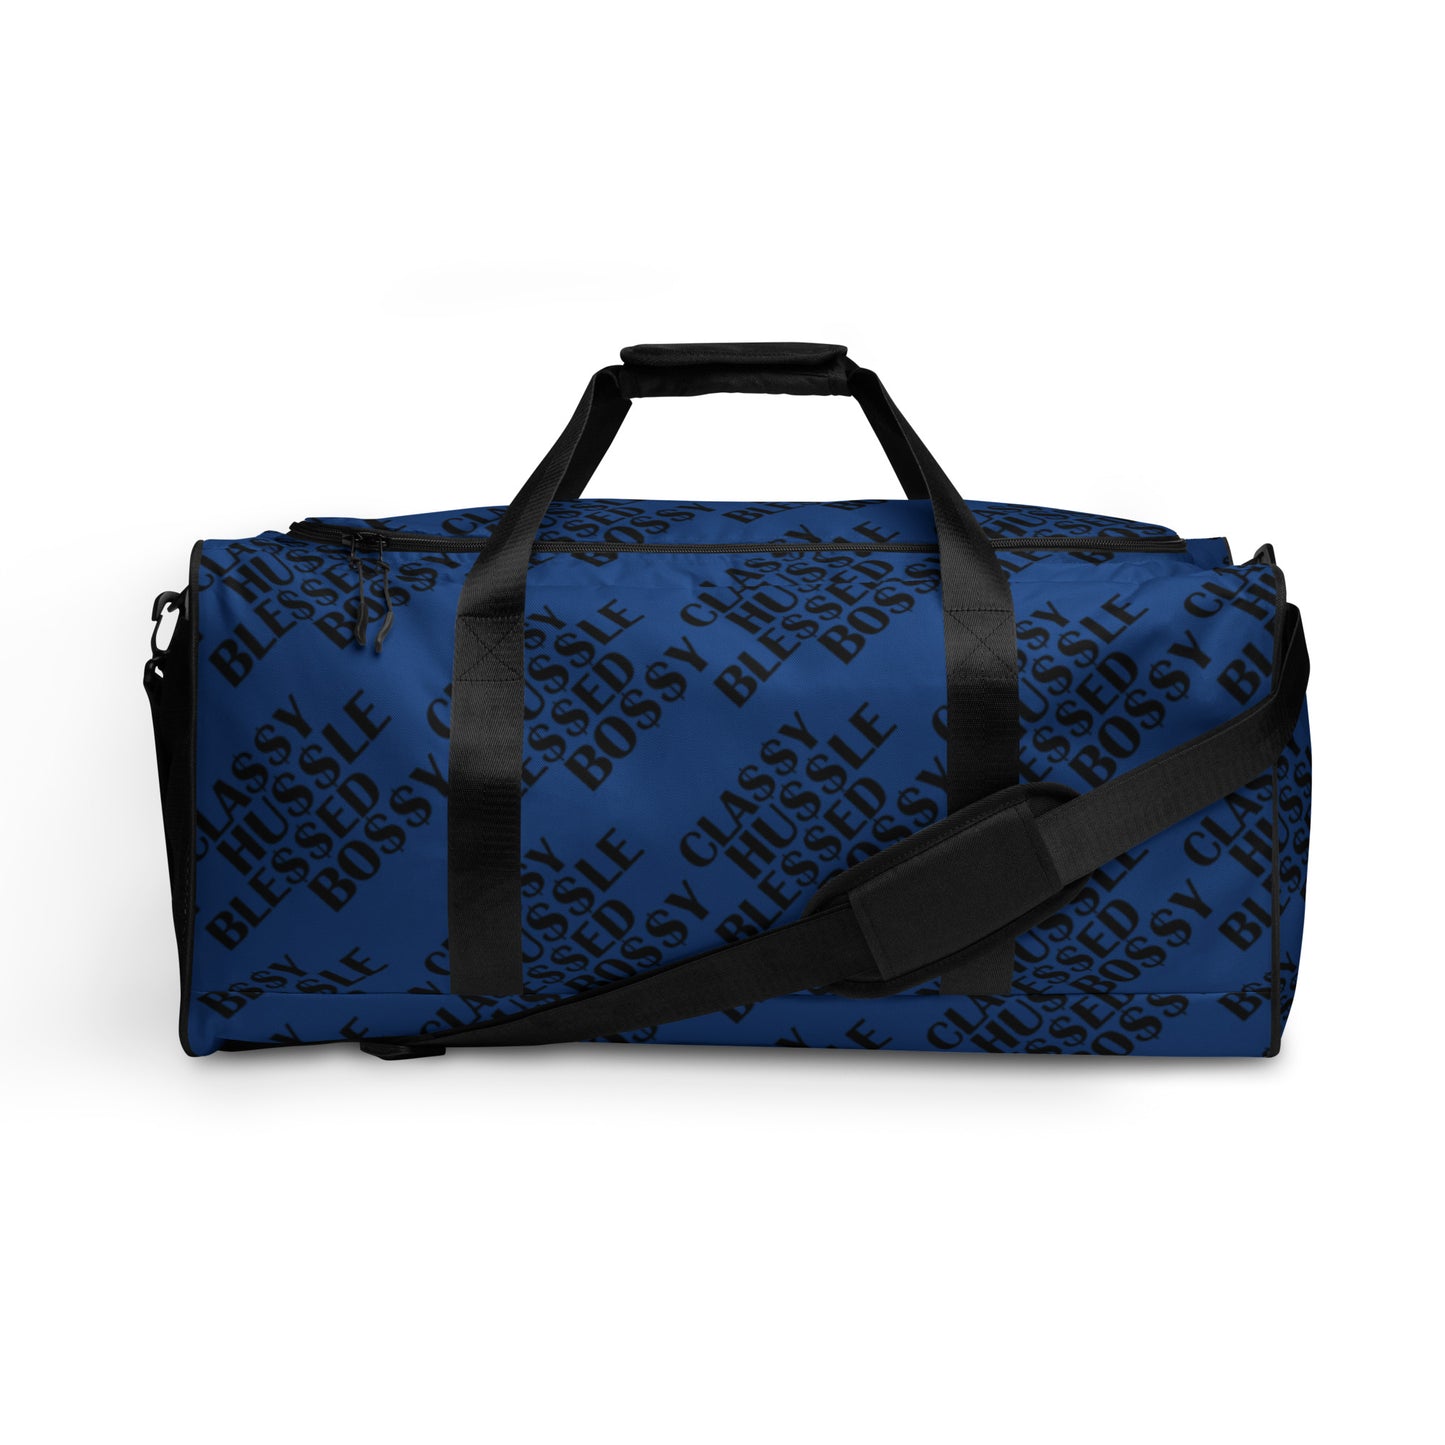 Hussle Blessed Bossy Duffle Bag Blue